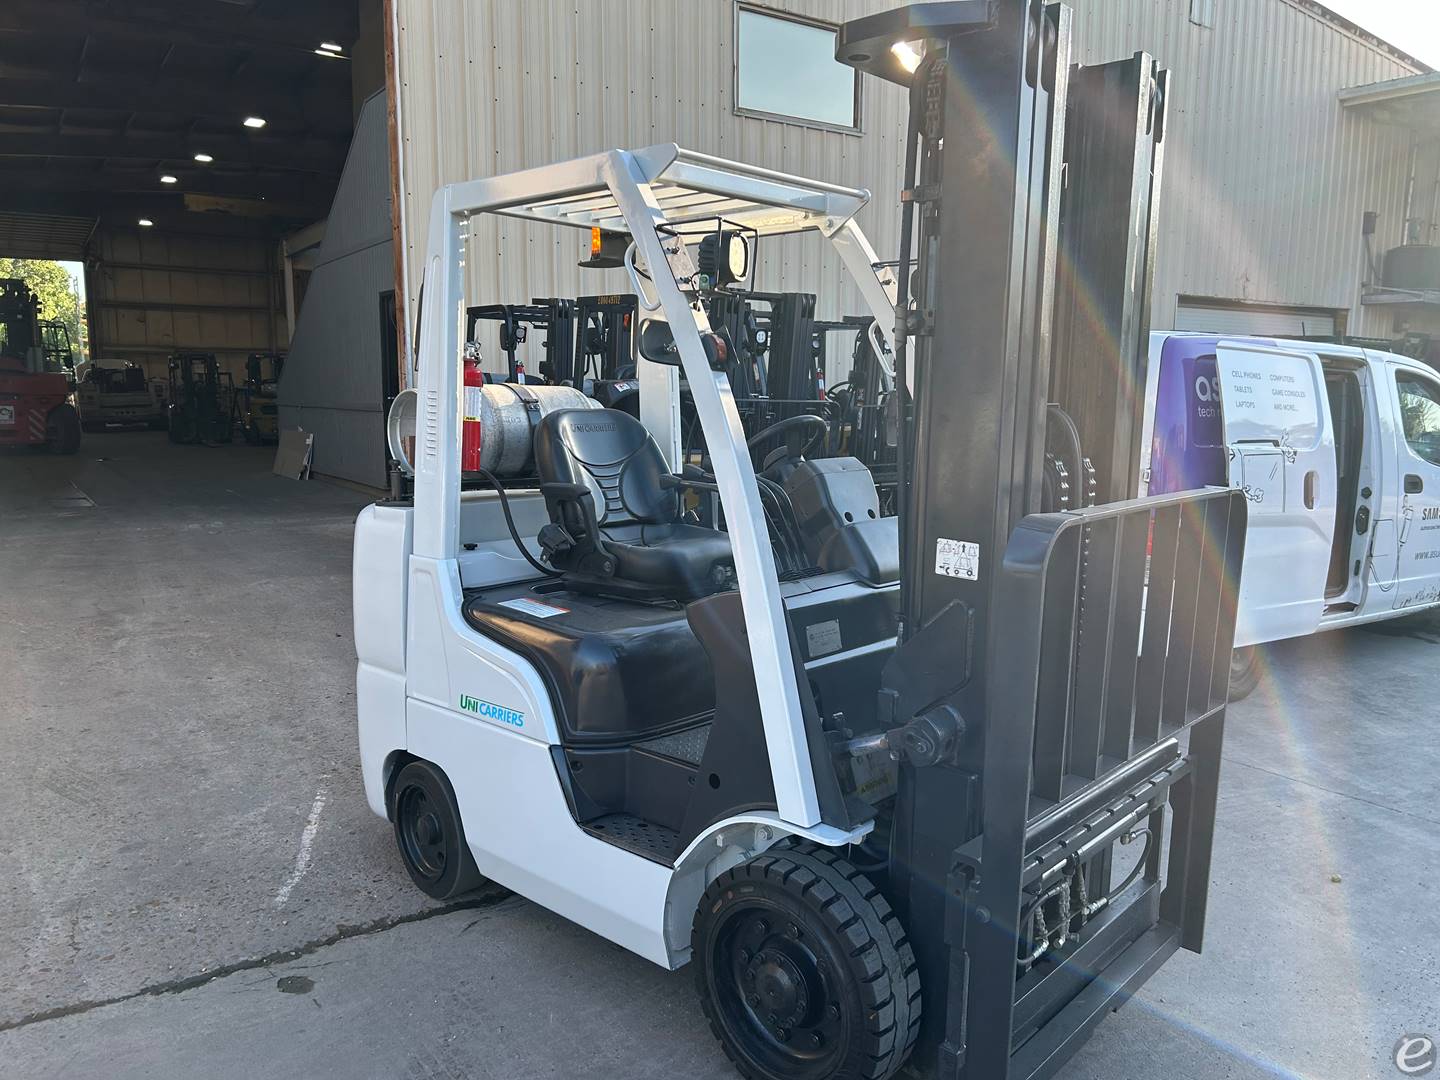 2015 Unicarriers CFS65 Cushion Tire Forklift - 123Forklift